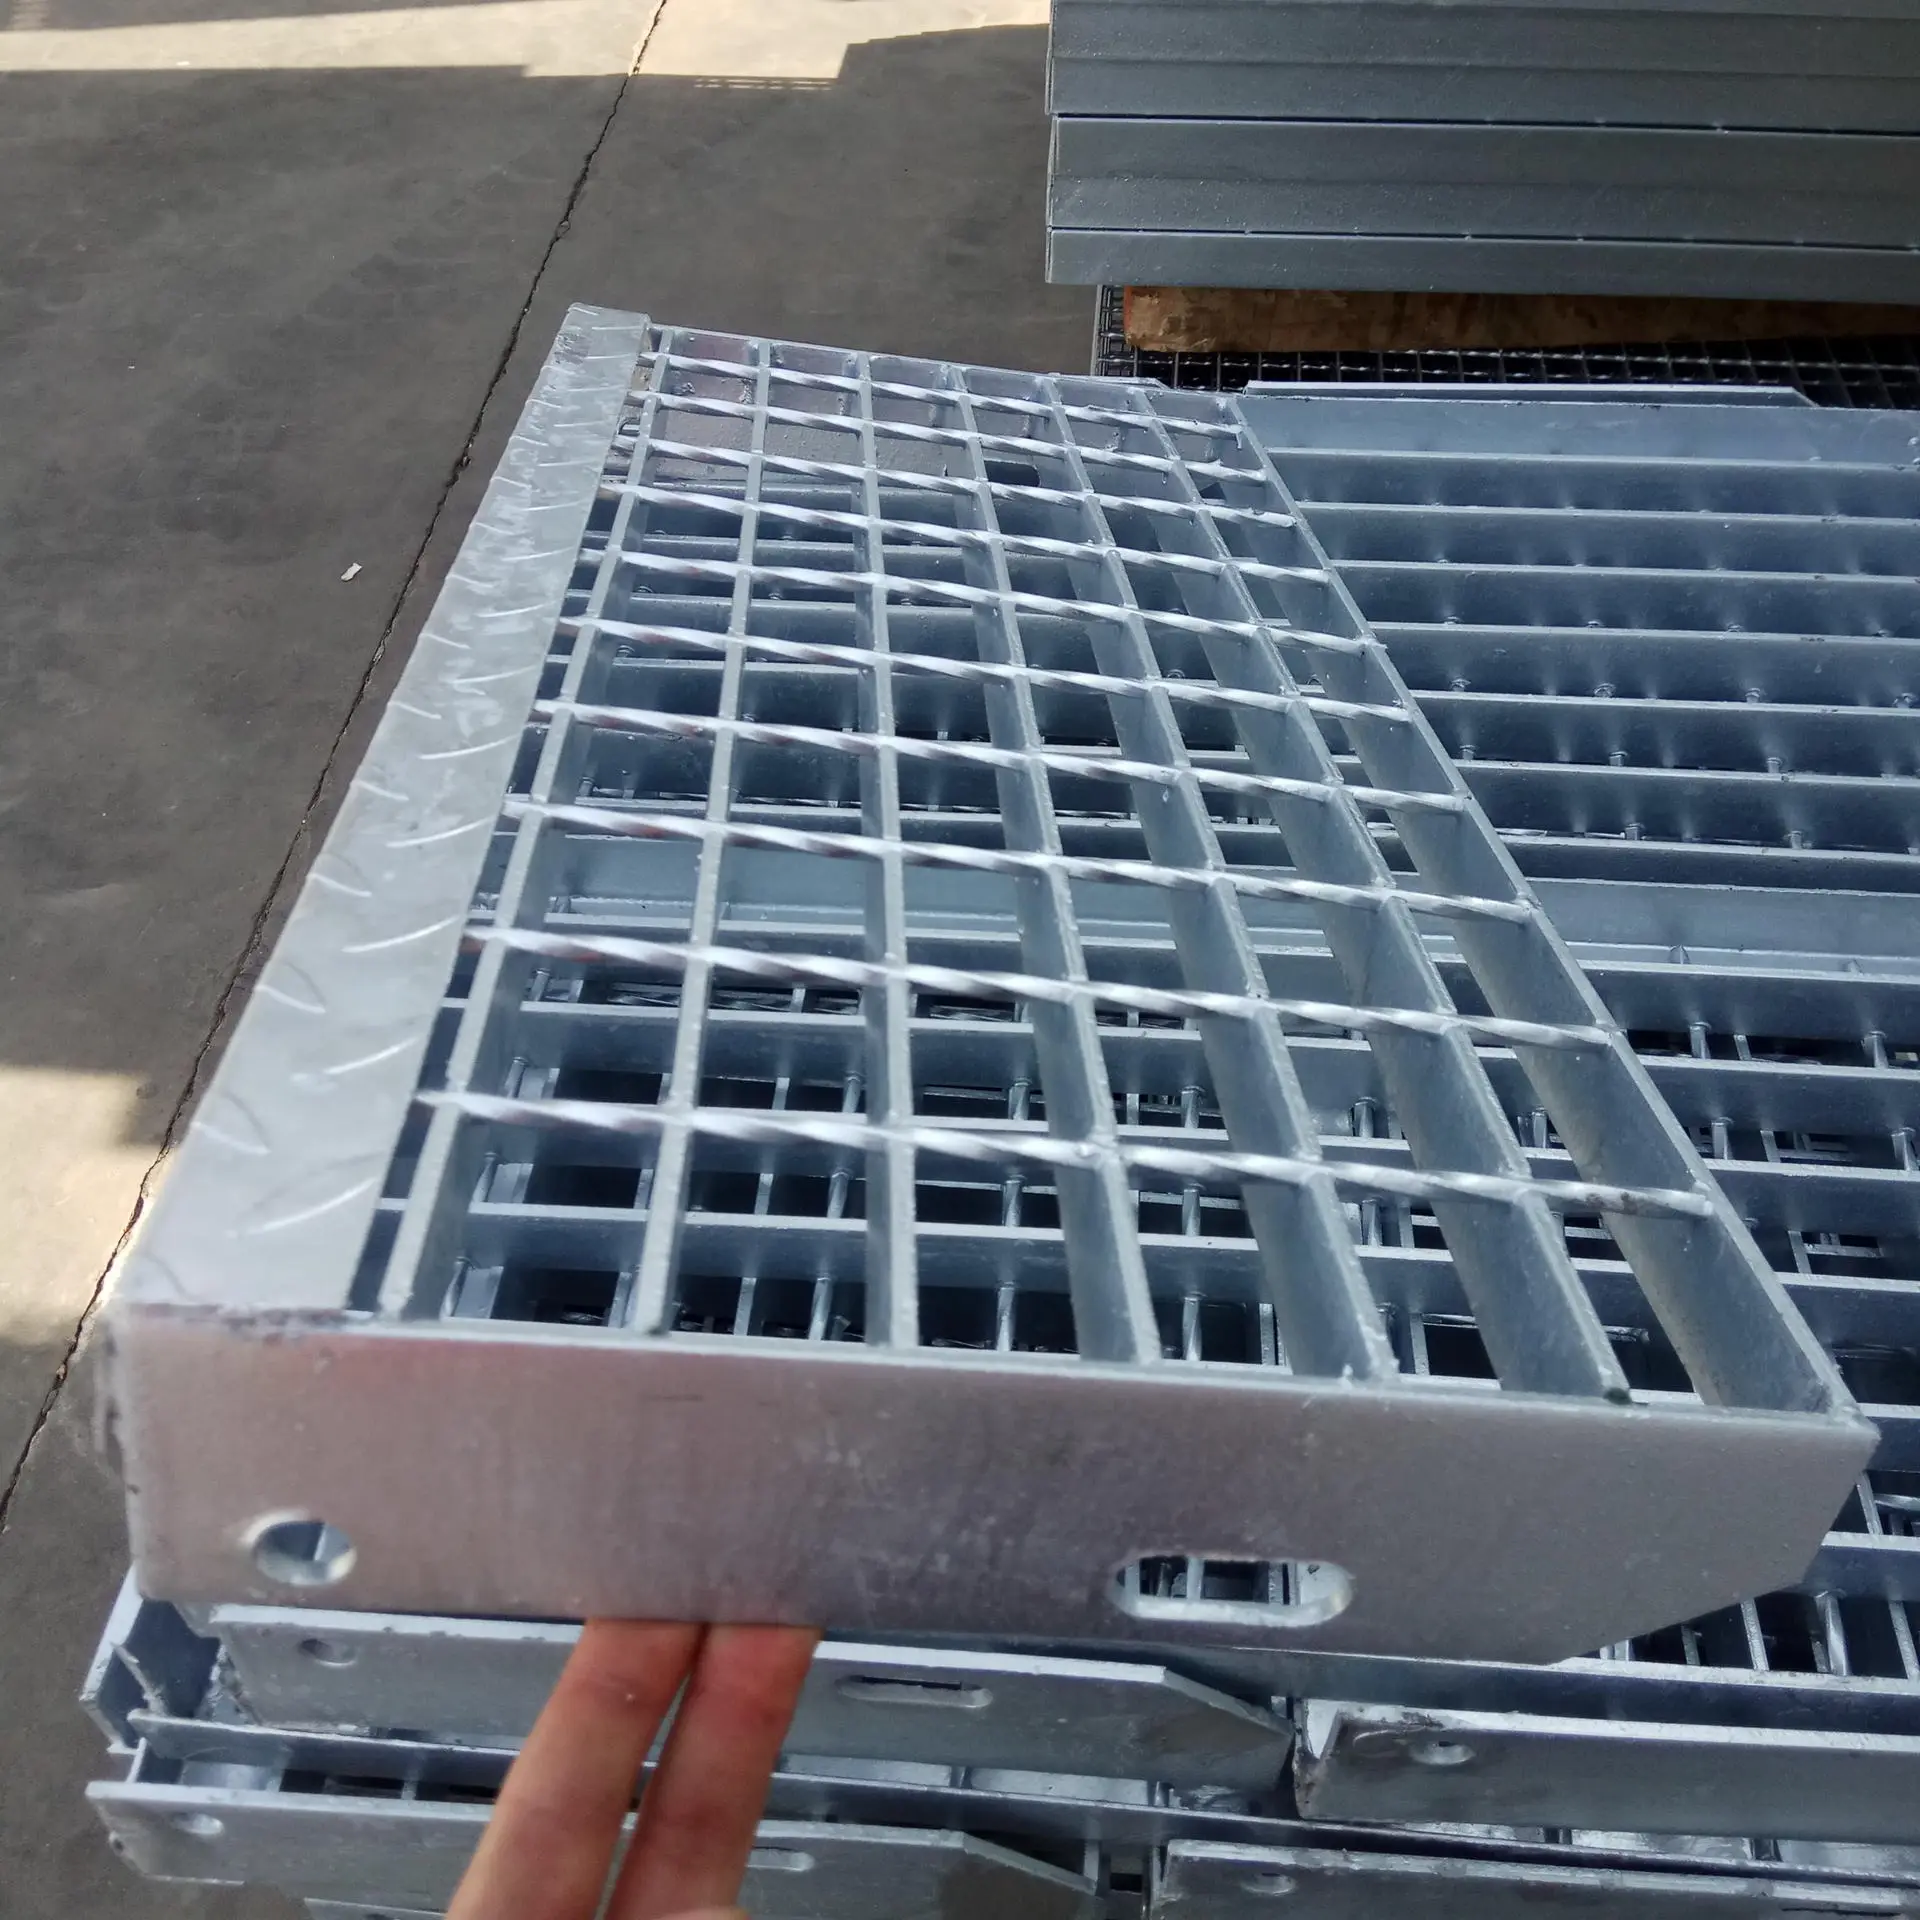 Low price 6m 25mm hot dipped galvanized steel grating